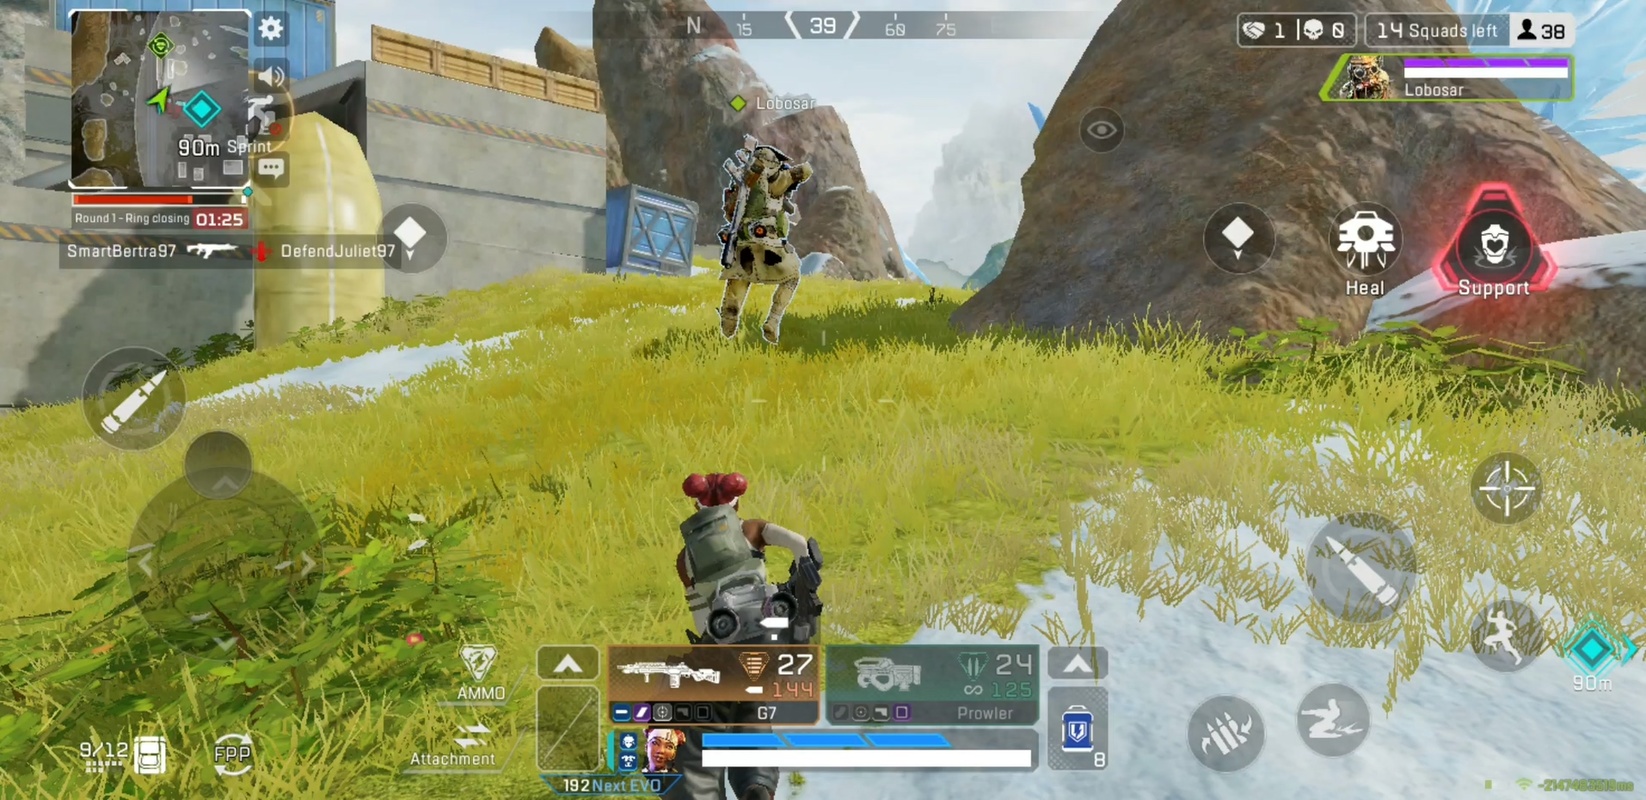 Modders at long last add wall-running to Apex Legends